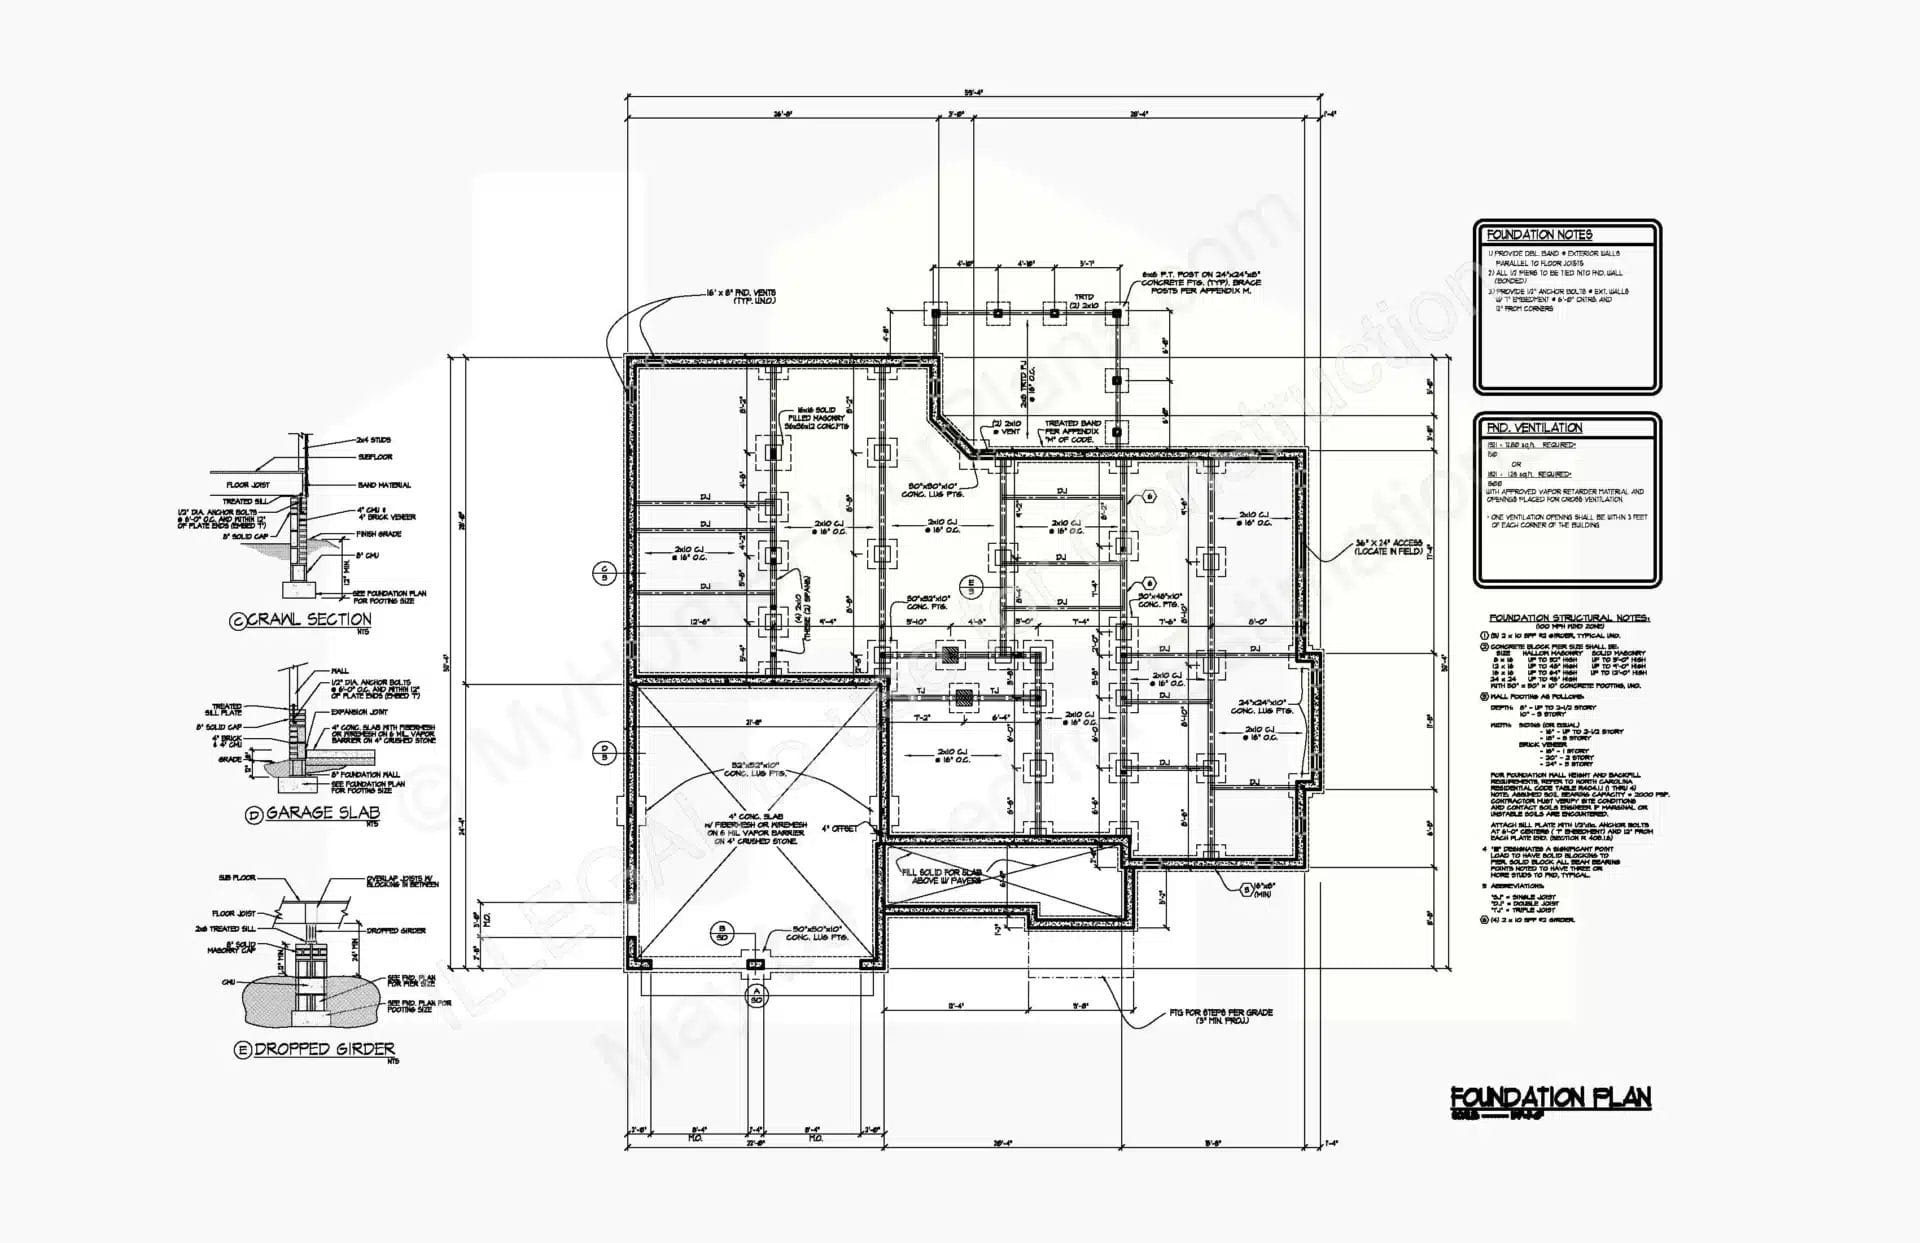 Technical drawing of a detailed 13-1214 home foundation design featuring labeled sections and measurements, with different symbols representing construction elements like walls and beams, accompanied by annotations and a title block.